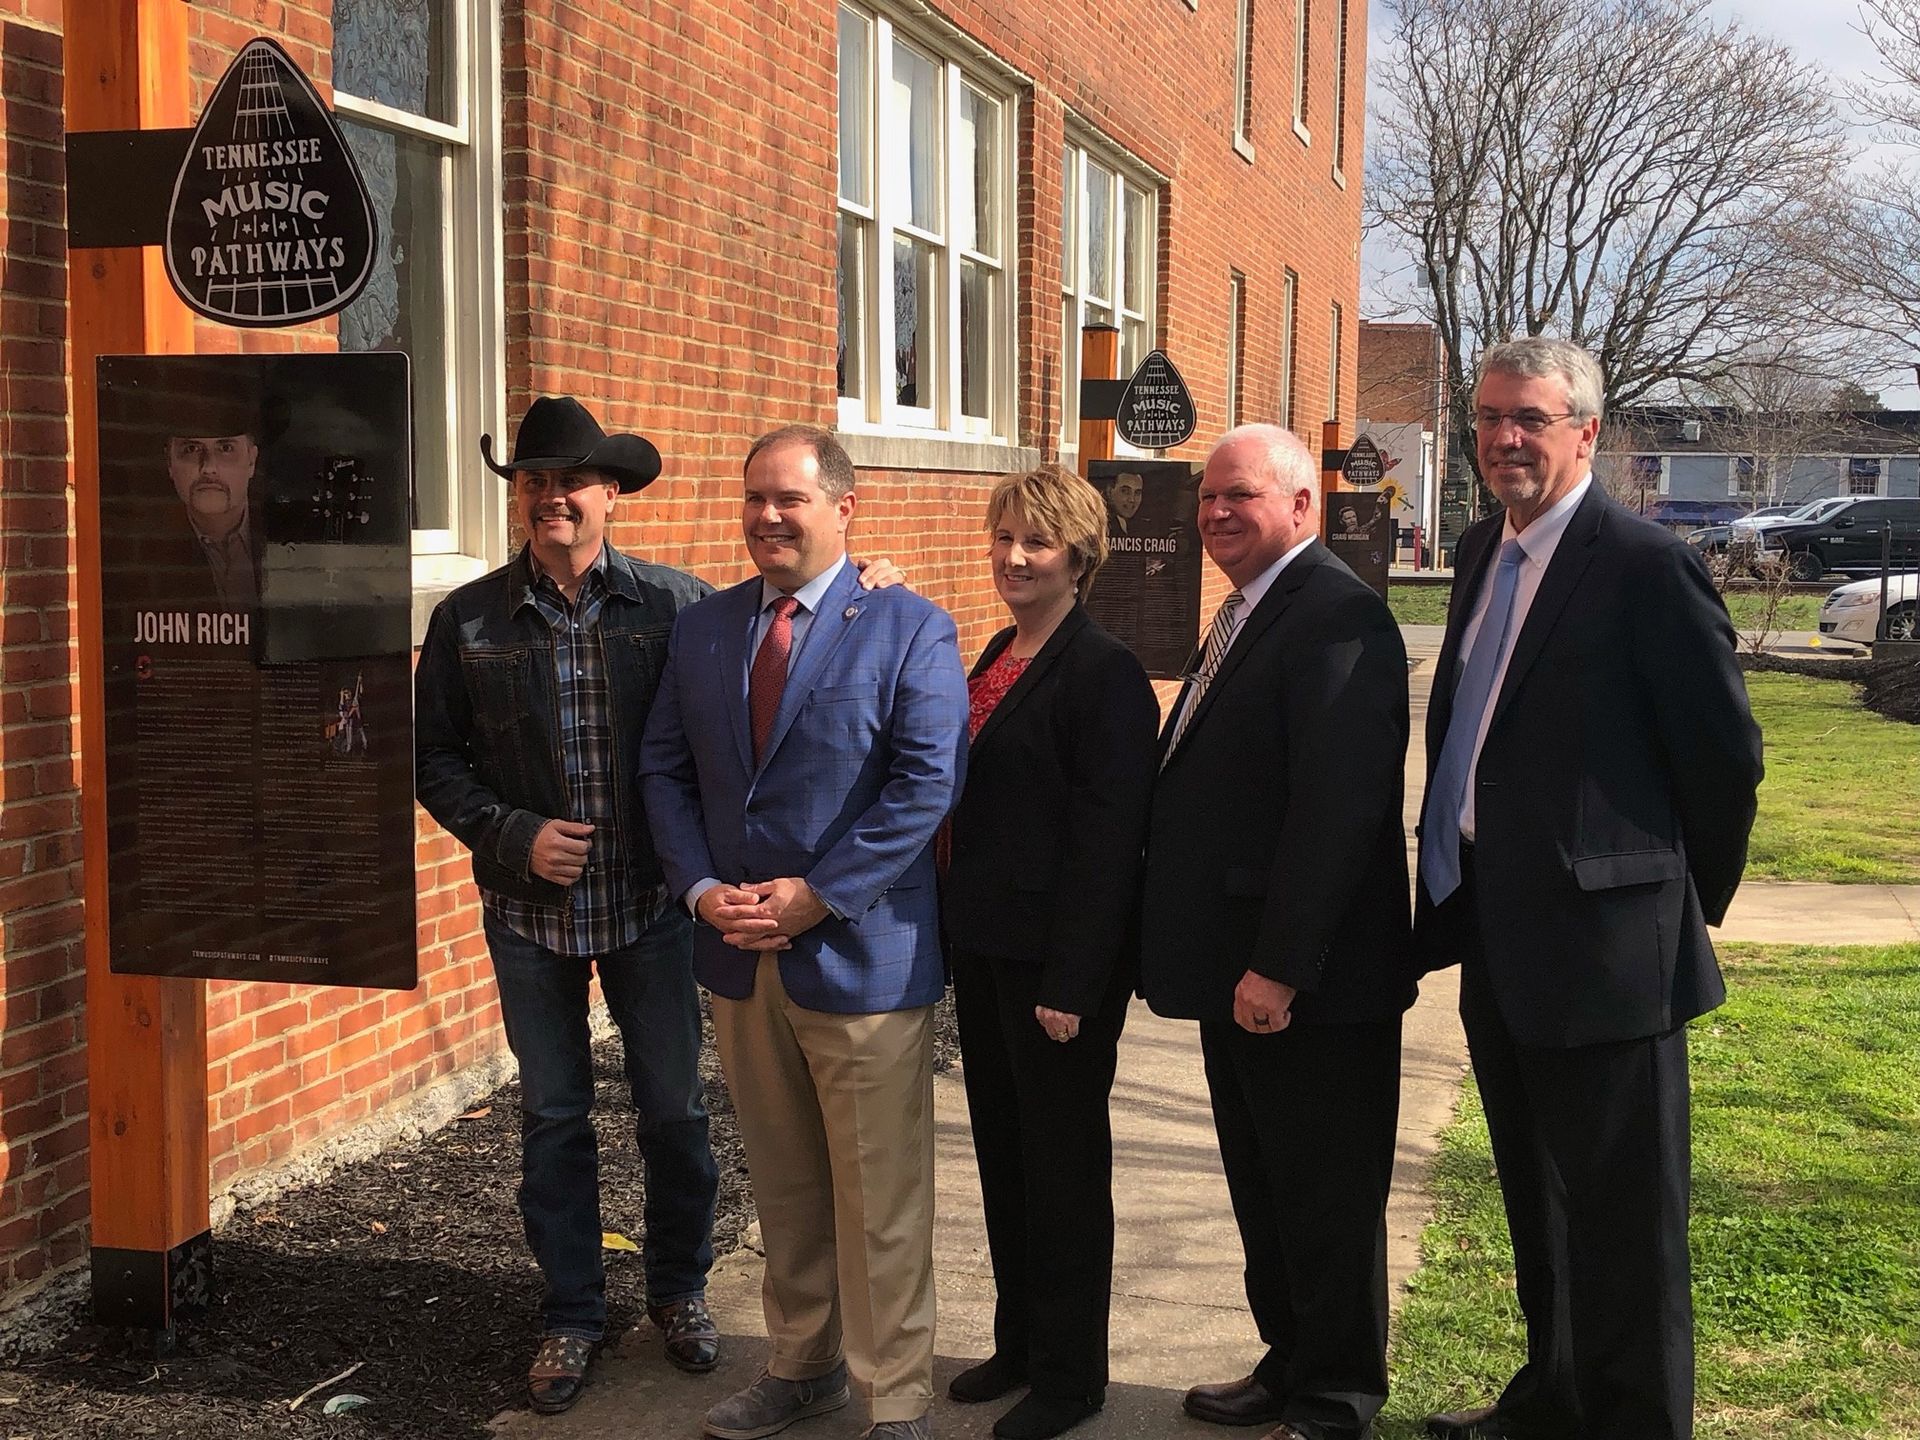 Unveiling of Tennessee Music Pathways marker in Holland Park